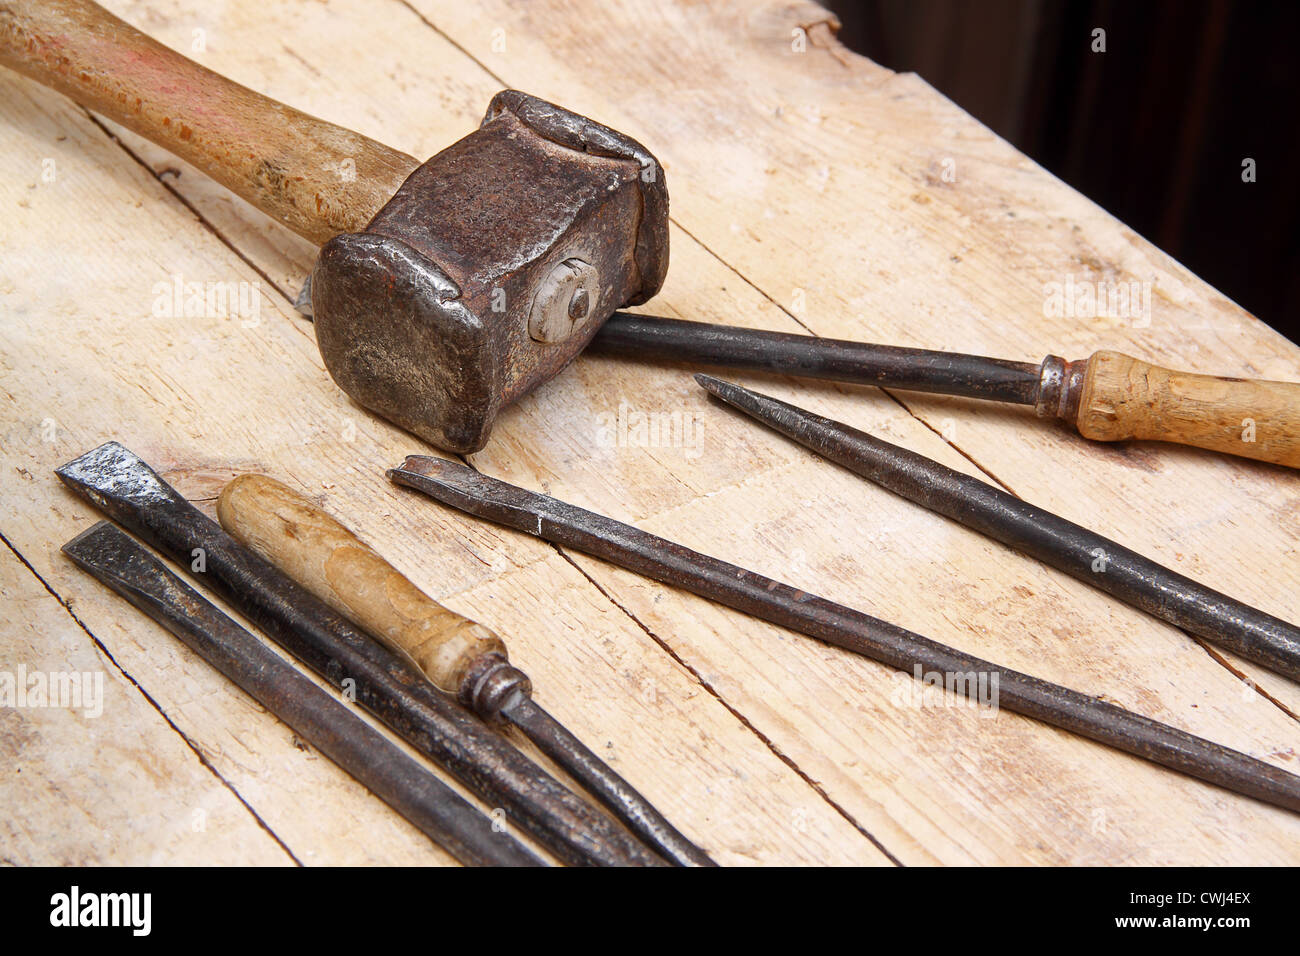 Set Of Hammer And Chisels For Woodworking Stock Photo, Picture and Royalty  Free Image. Image 15009879.